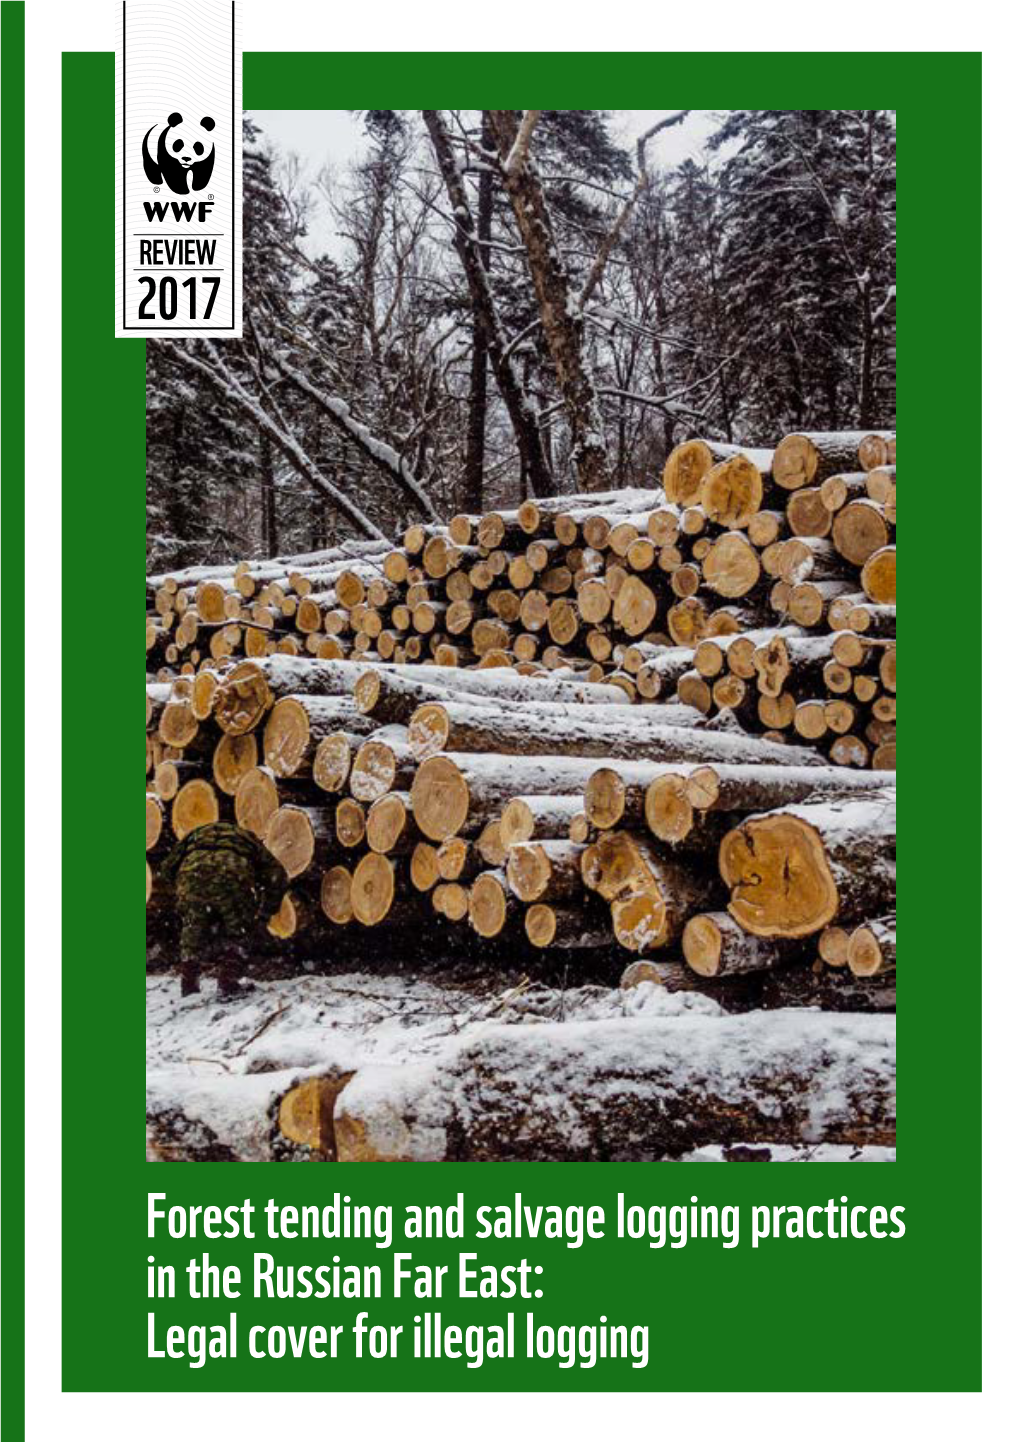 FOREST TENDING and SALVAGE LOGGING PRACTICES in the RUSSIAN FAR EAST: Legal Cover for Illegal Logging